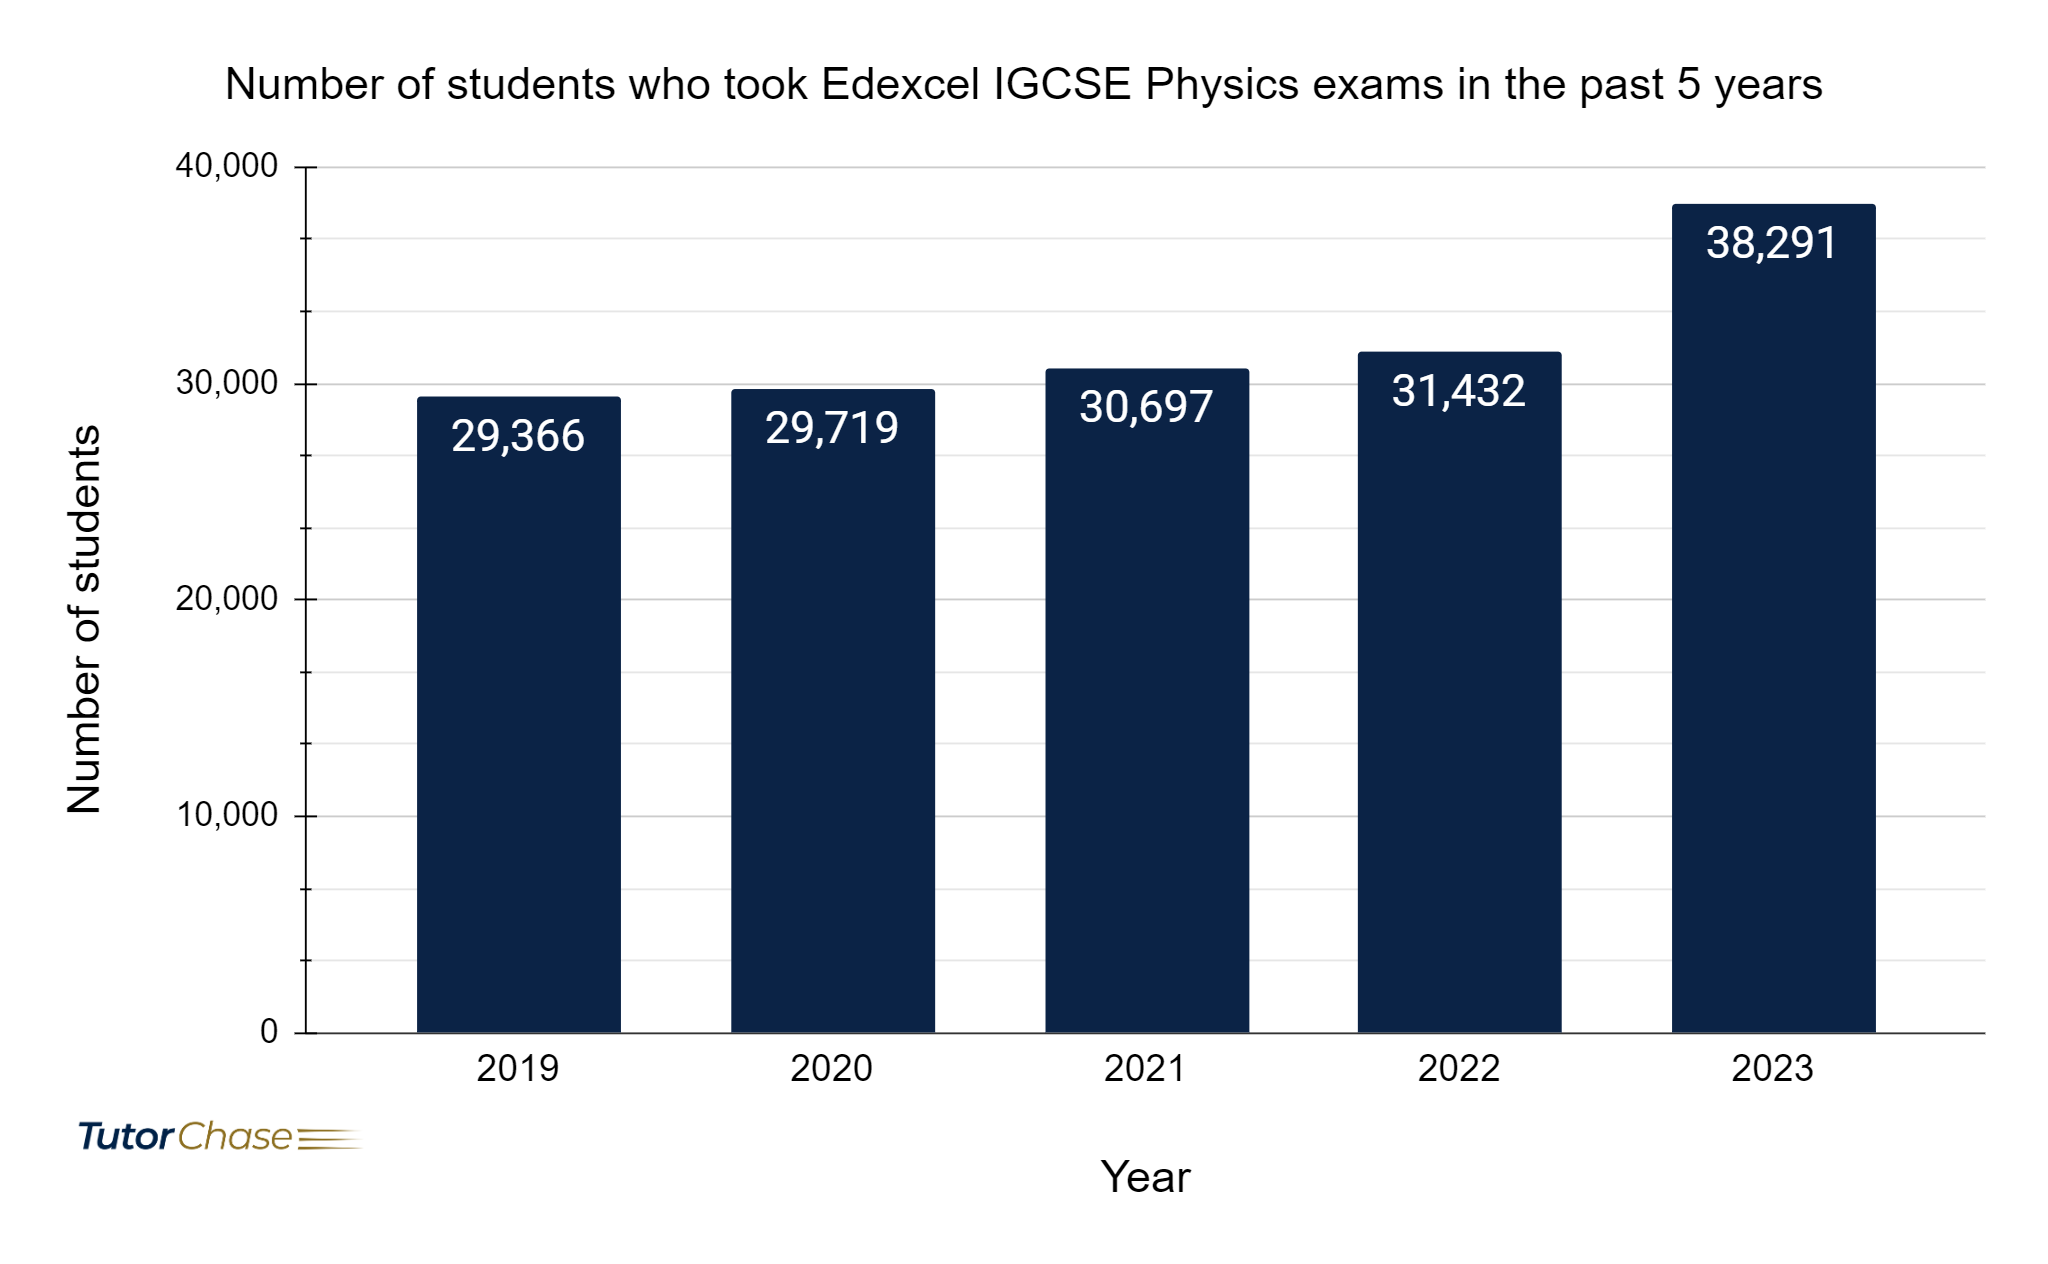 Number of students who took Edexcel IGCSE Physics exams in the past 5 years